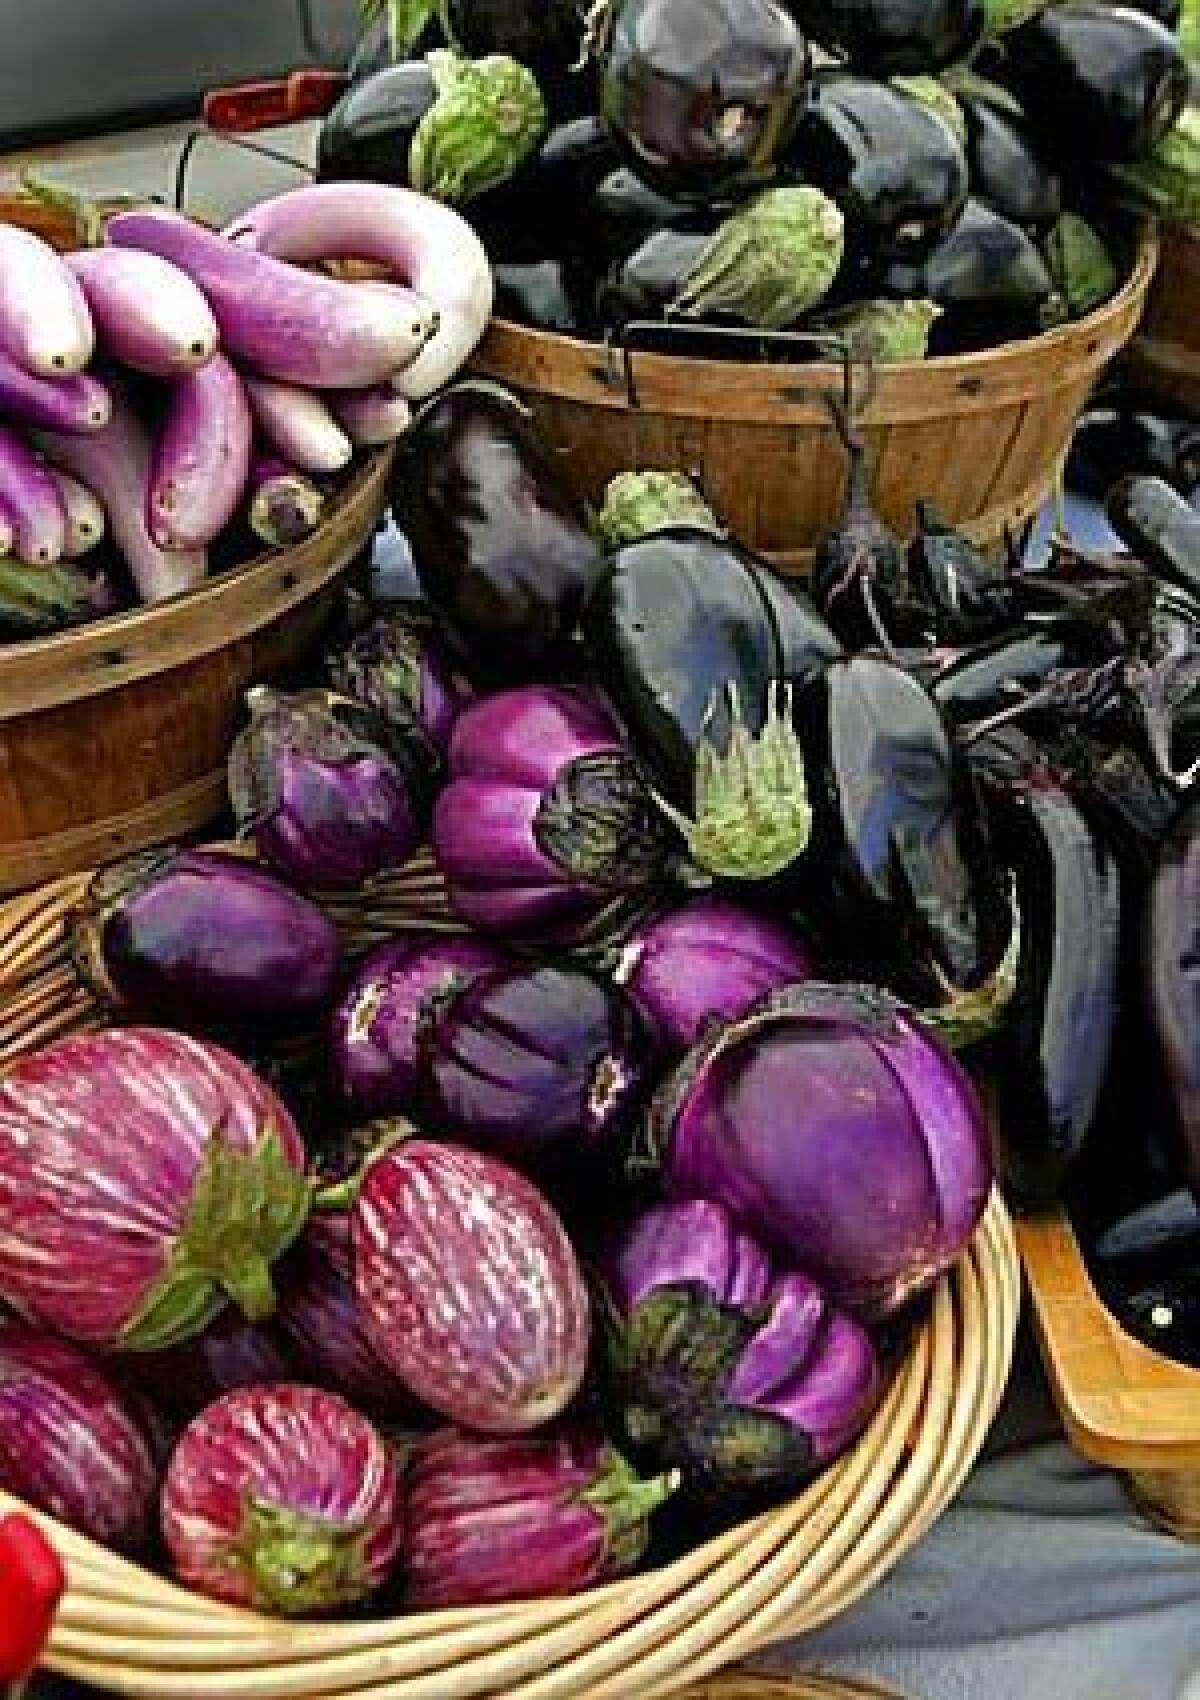 Some of the many varieties of eggplant